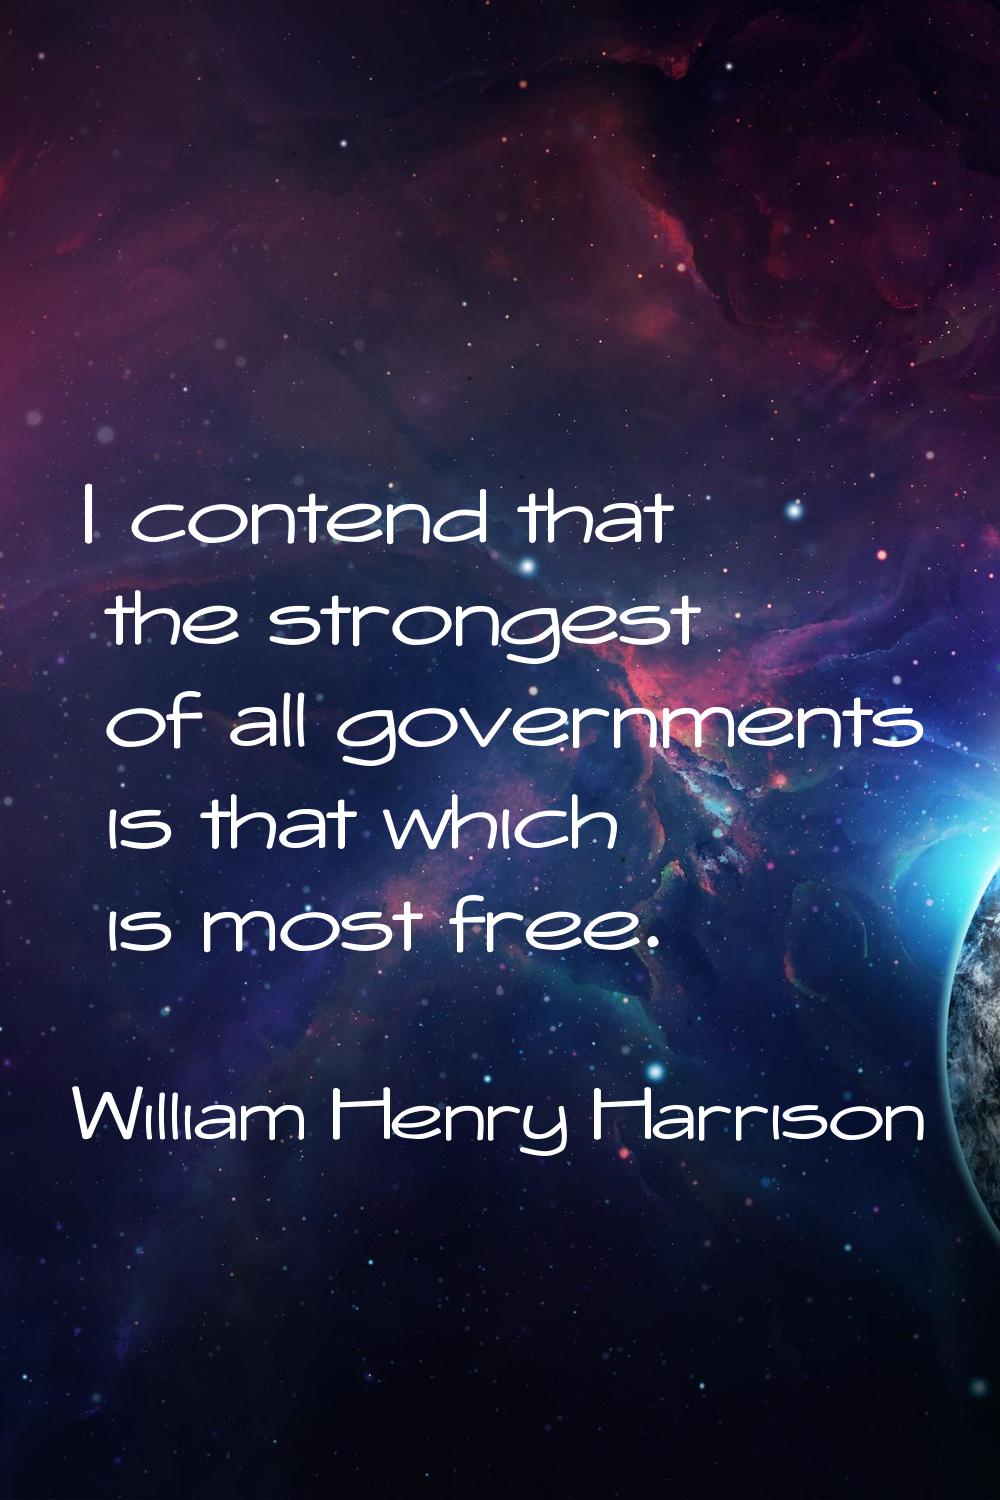 I contend that the strongest of all governments is that which is most free.